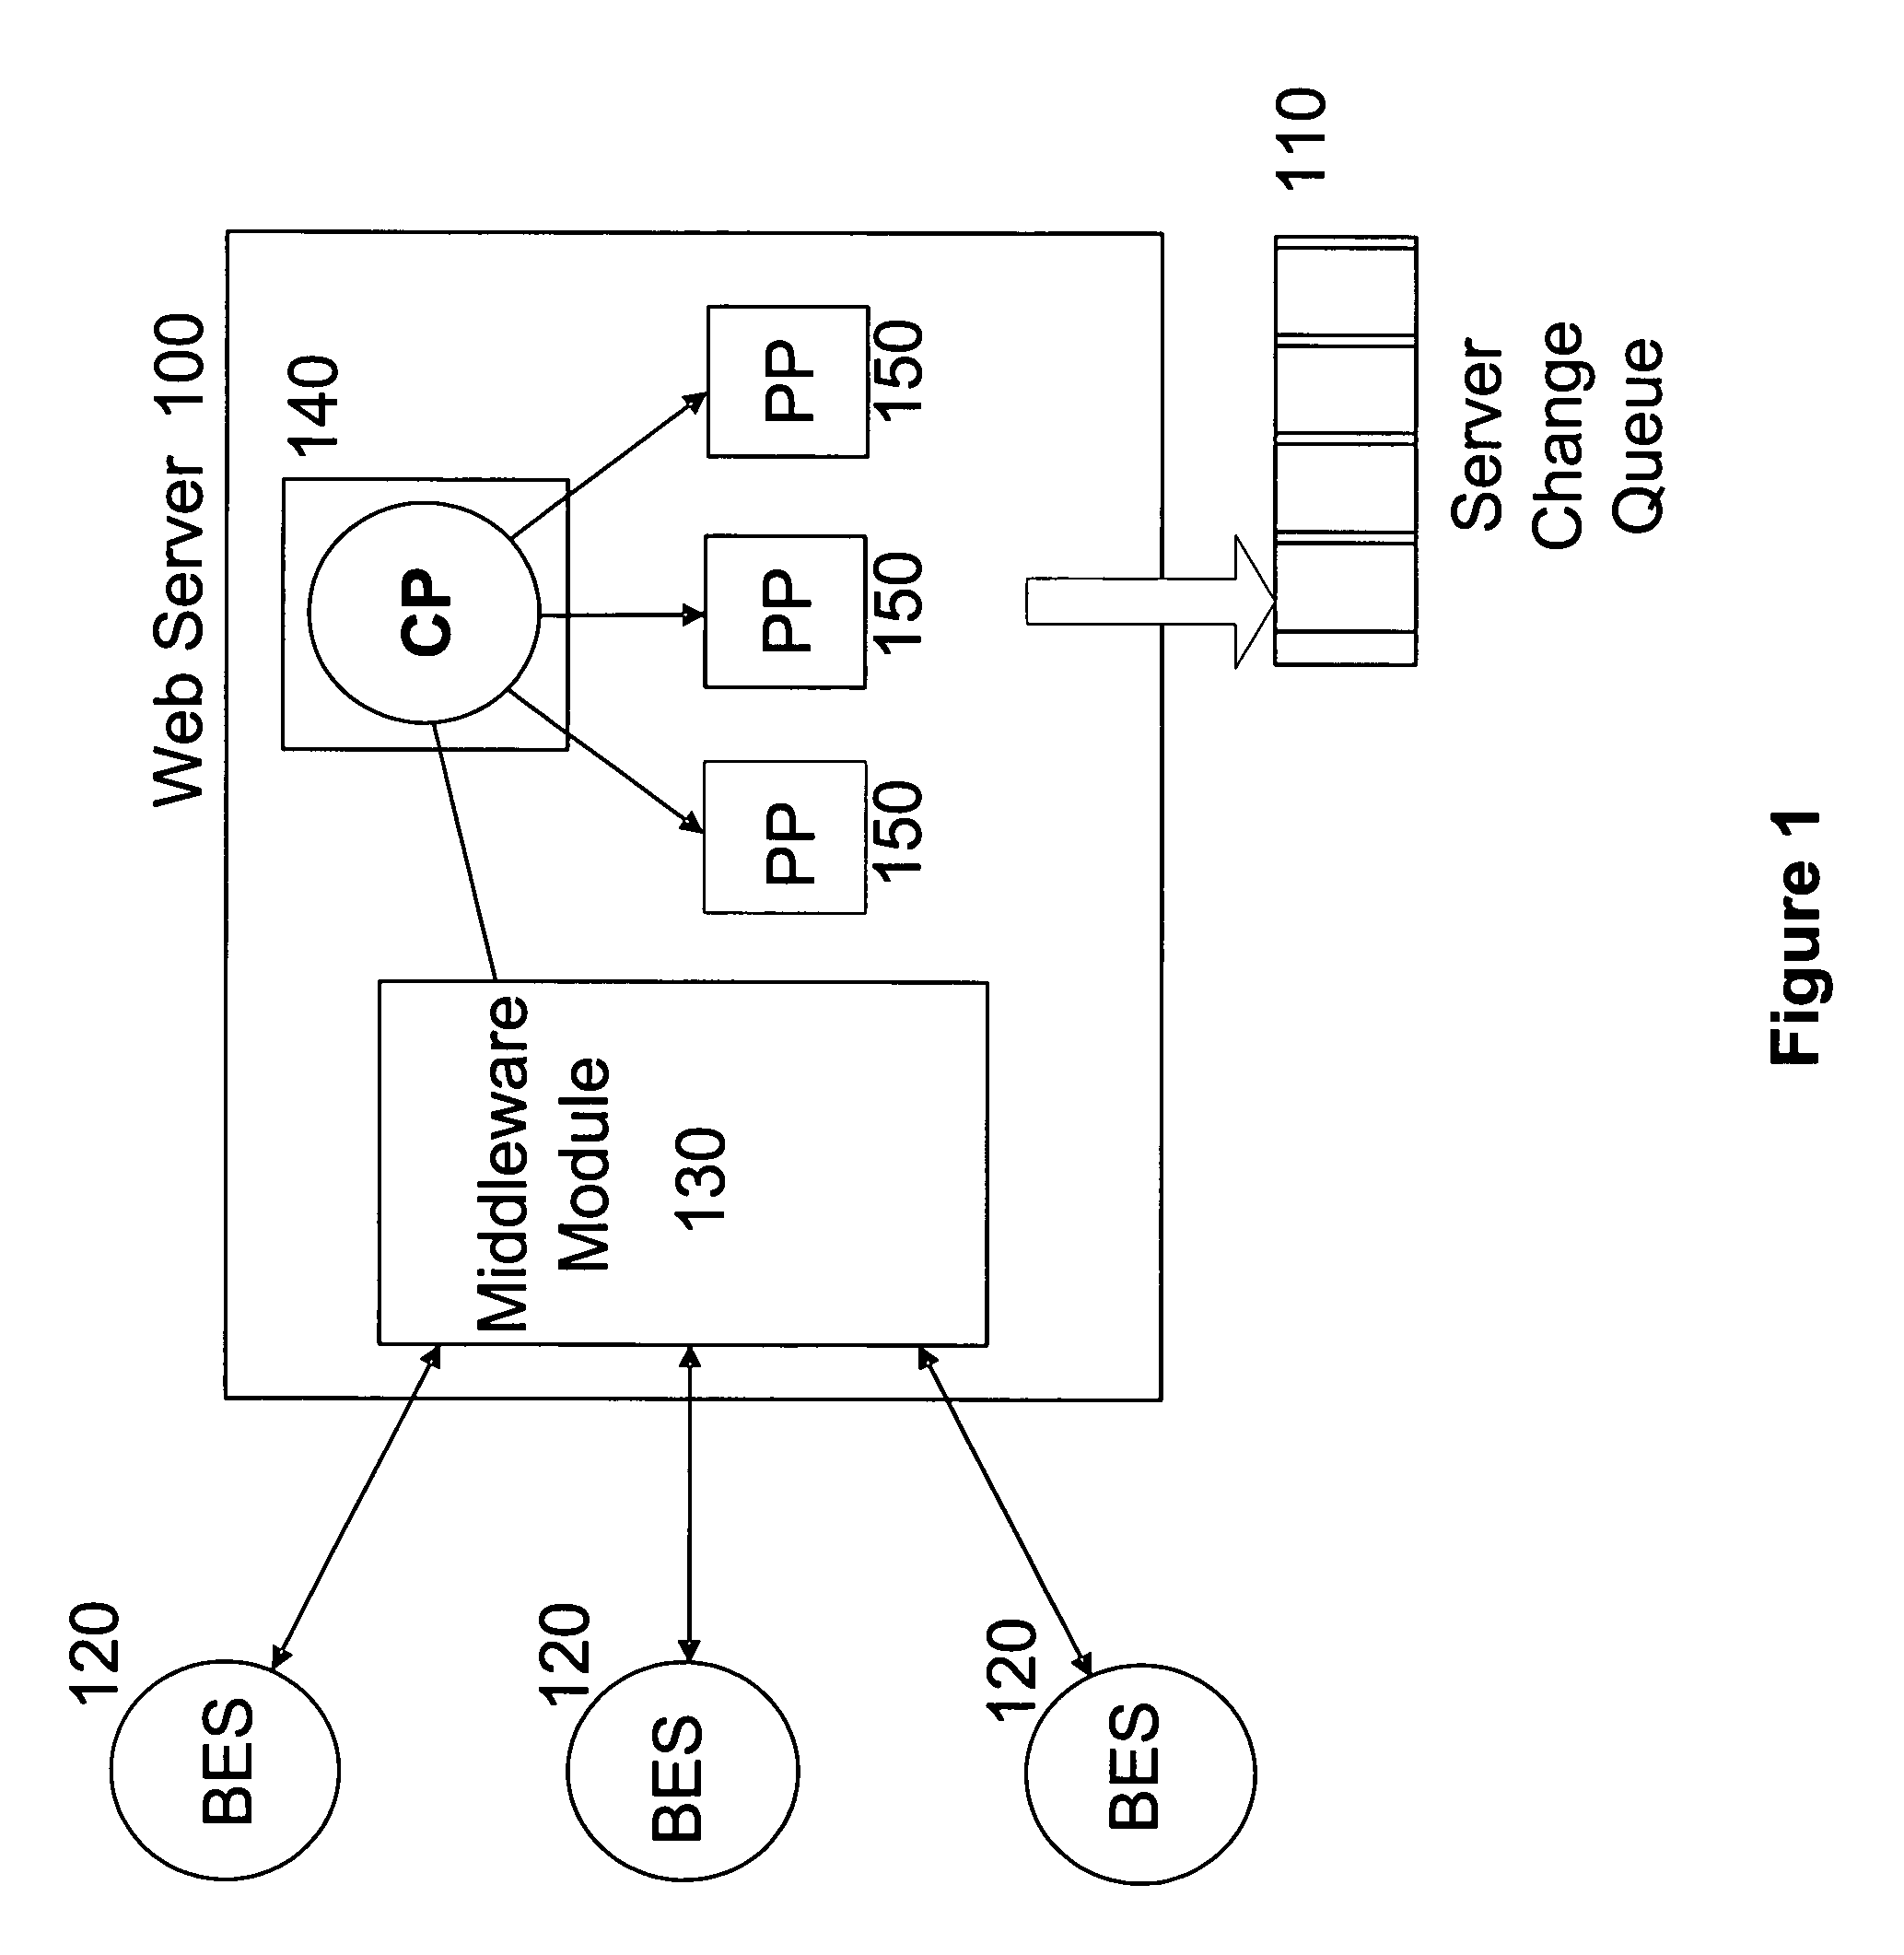 Method and apparatus for partial updating of client interfaces